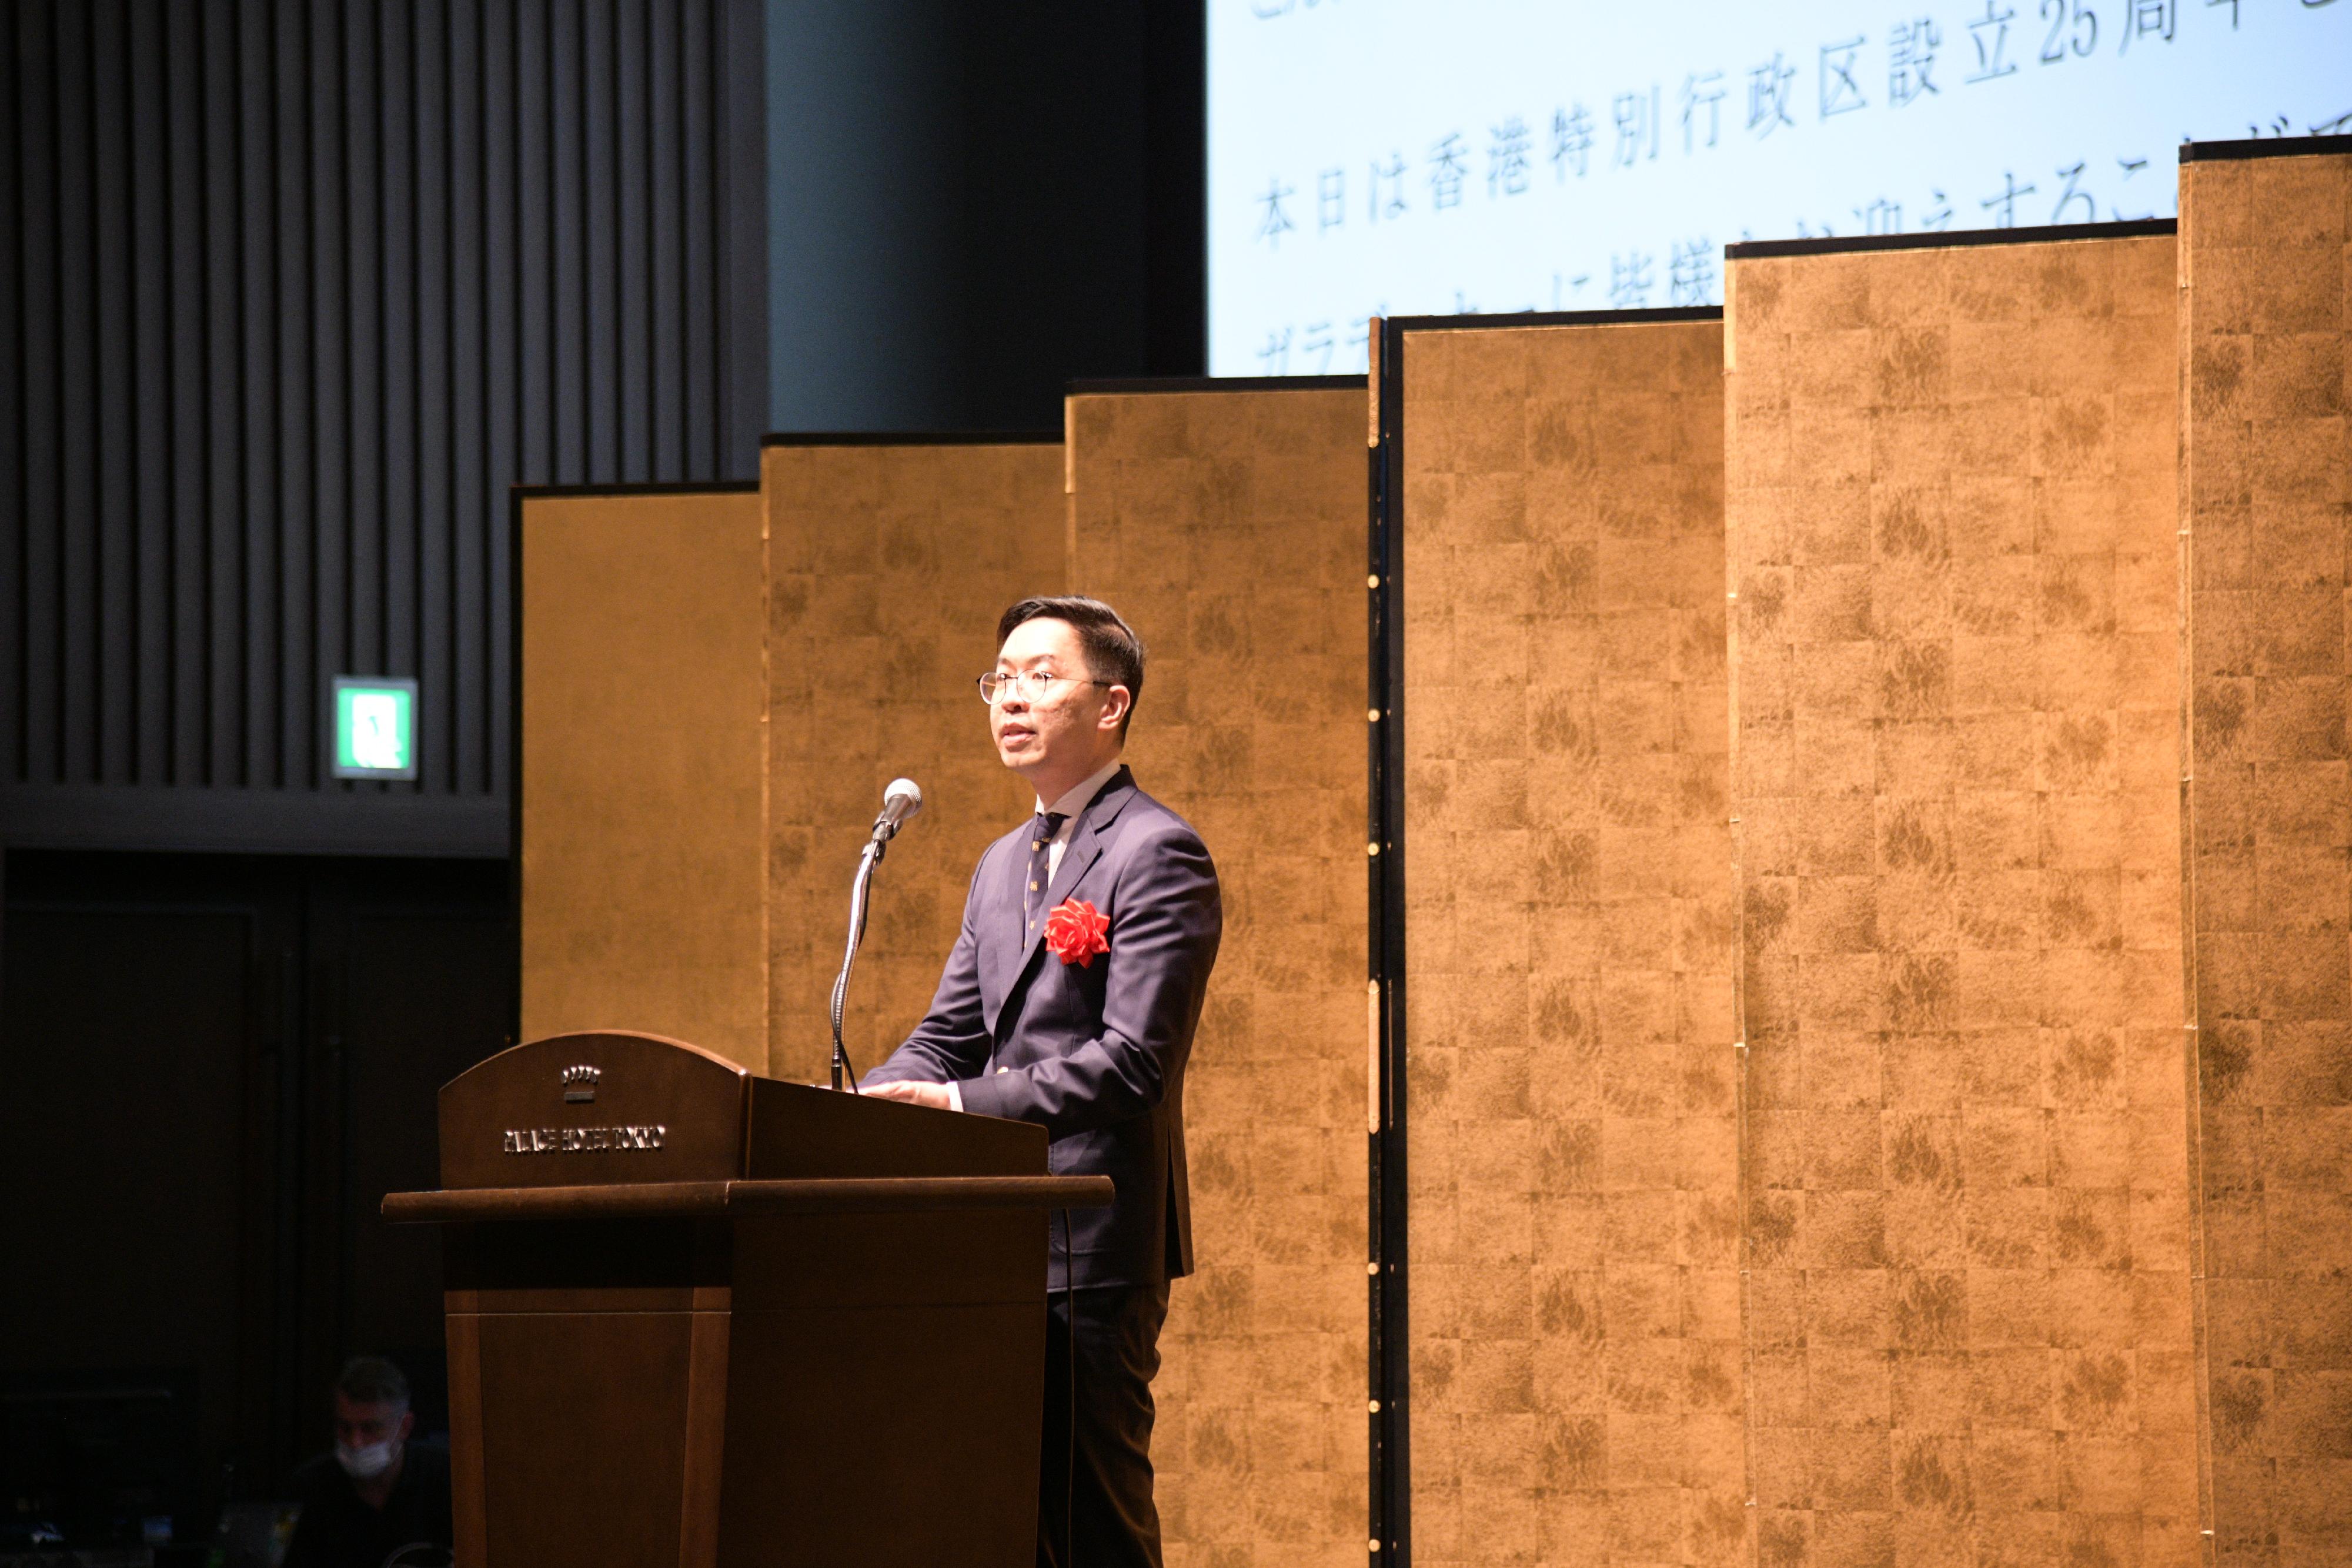 The Acting Principal Hong Kong Economic and Trade Representative (Tokyo), Mr Thomas Wu, delivers a speech today (July 29) at a gala dinner in Tokyo, Japan, to celebrate the 25th anniversary of the establishment of the Hong Kong Special Administrative Region.